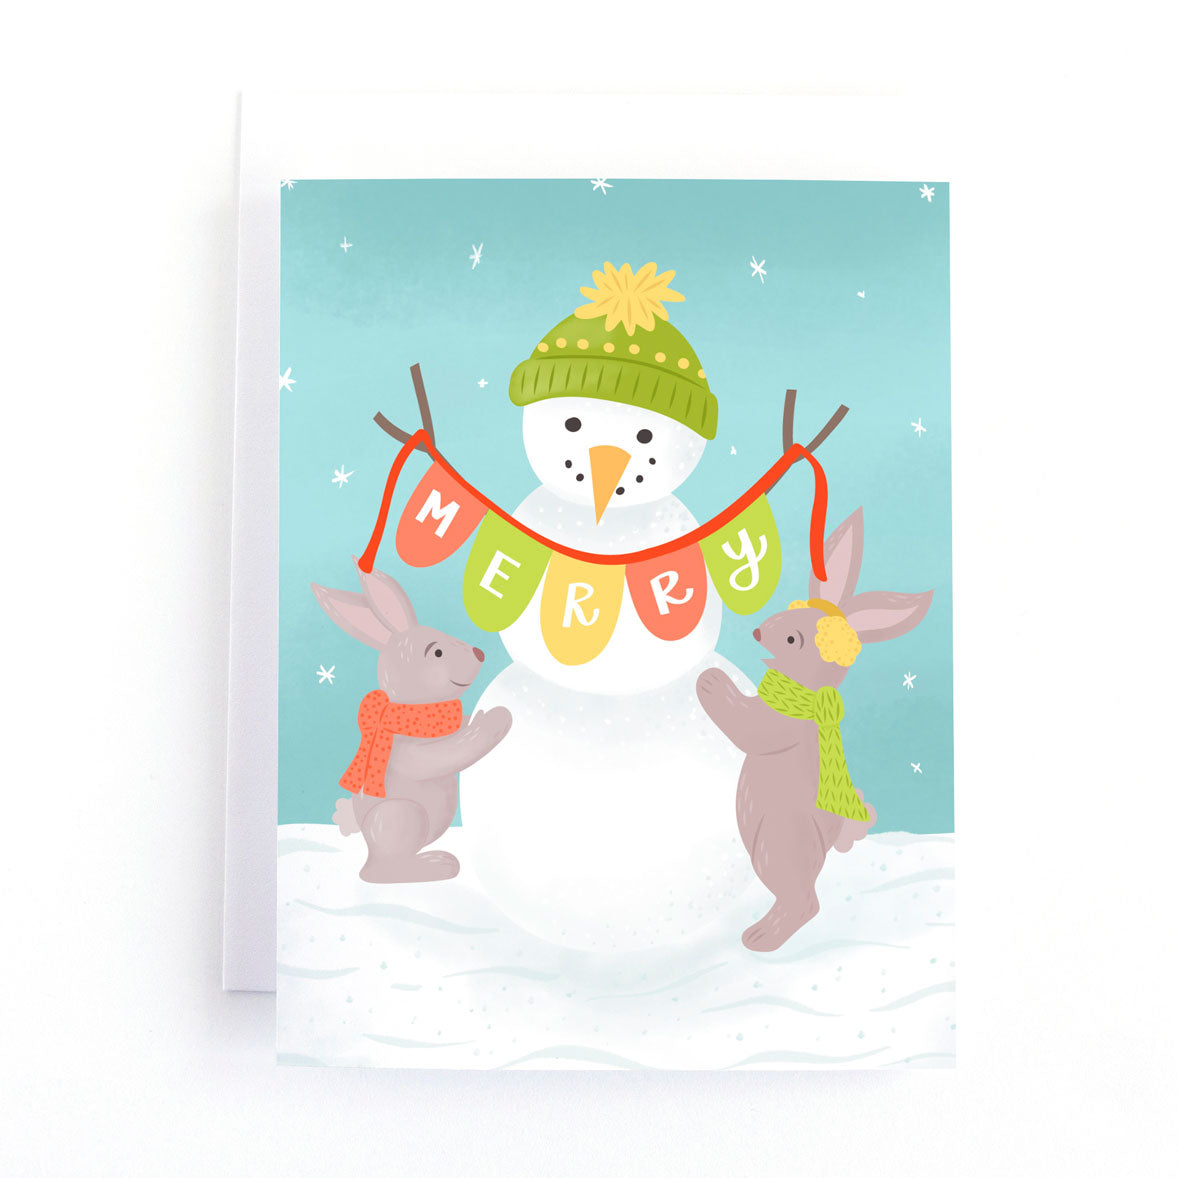 A winter holiday card featuring a snowman and bunnies playing in the snow. the snowman is holding a christmas garland that says Merry